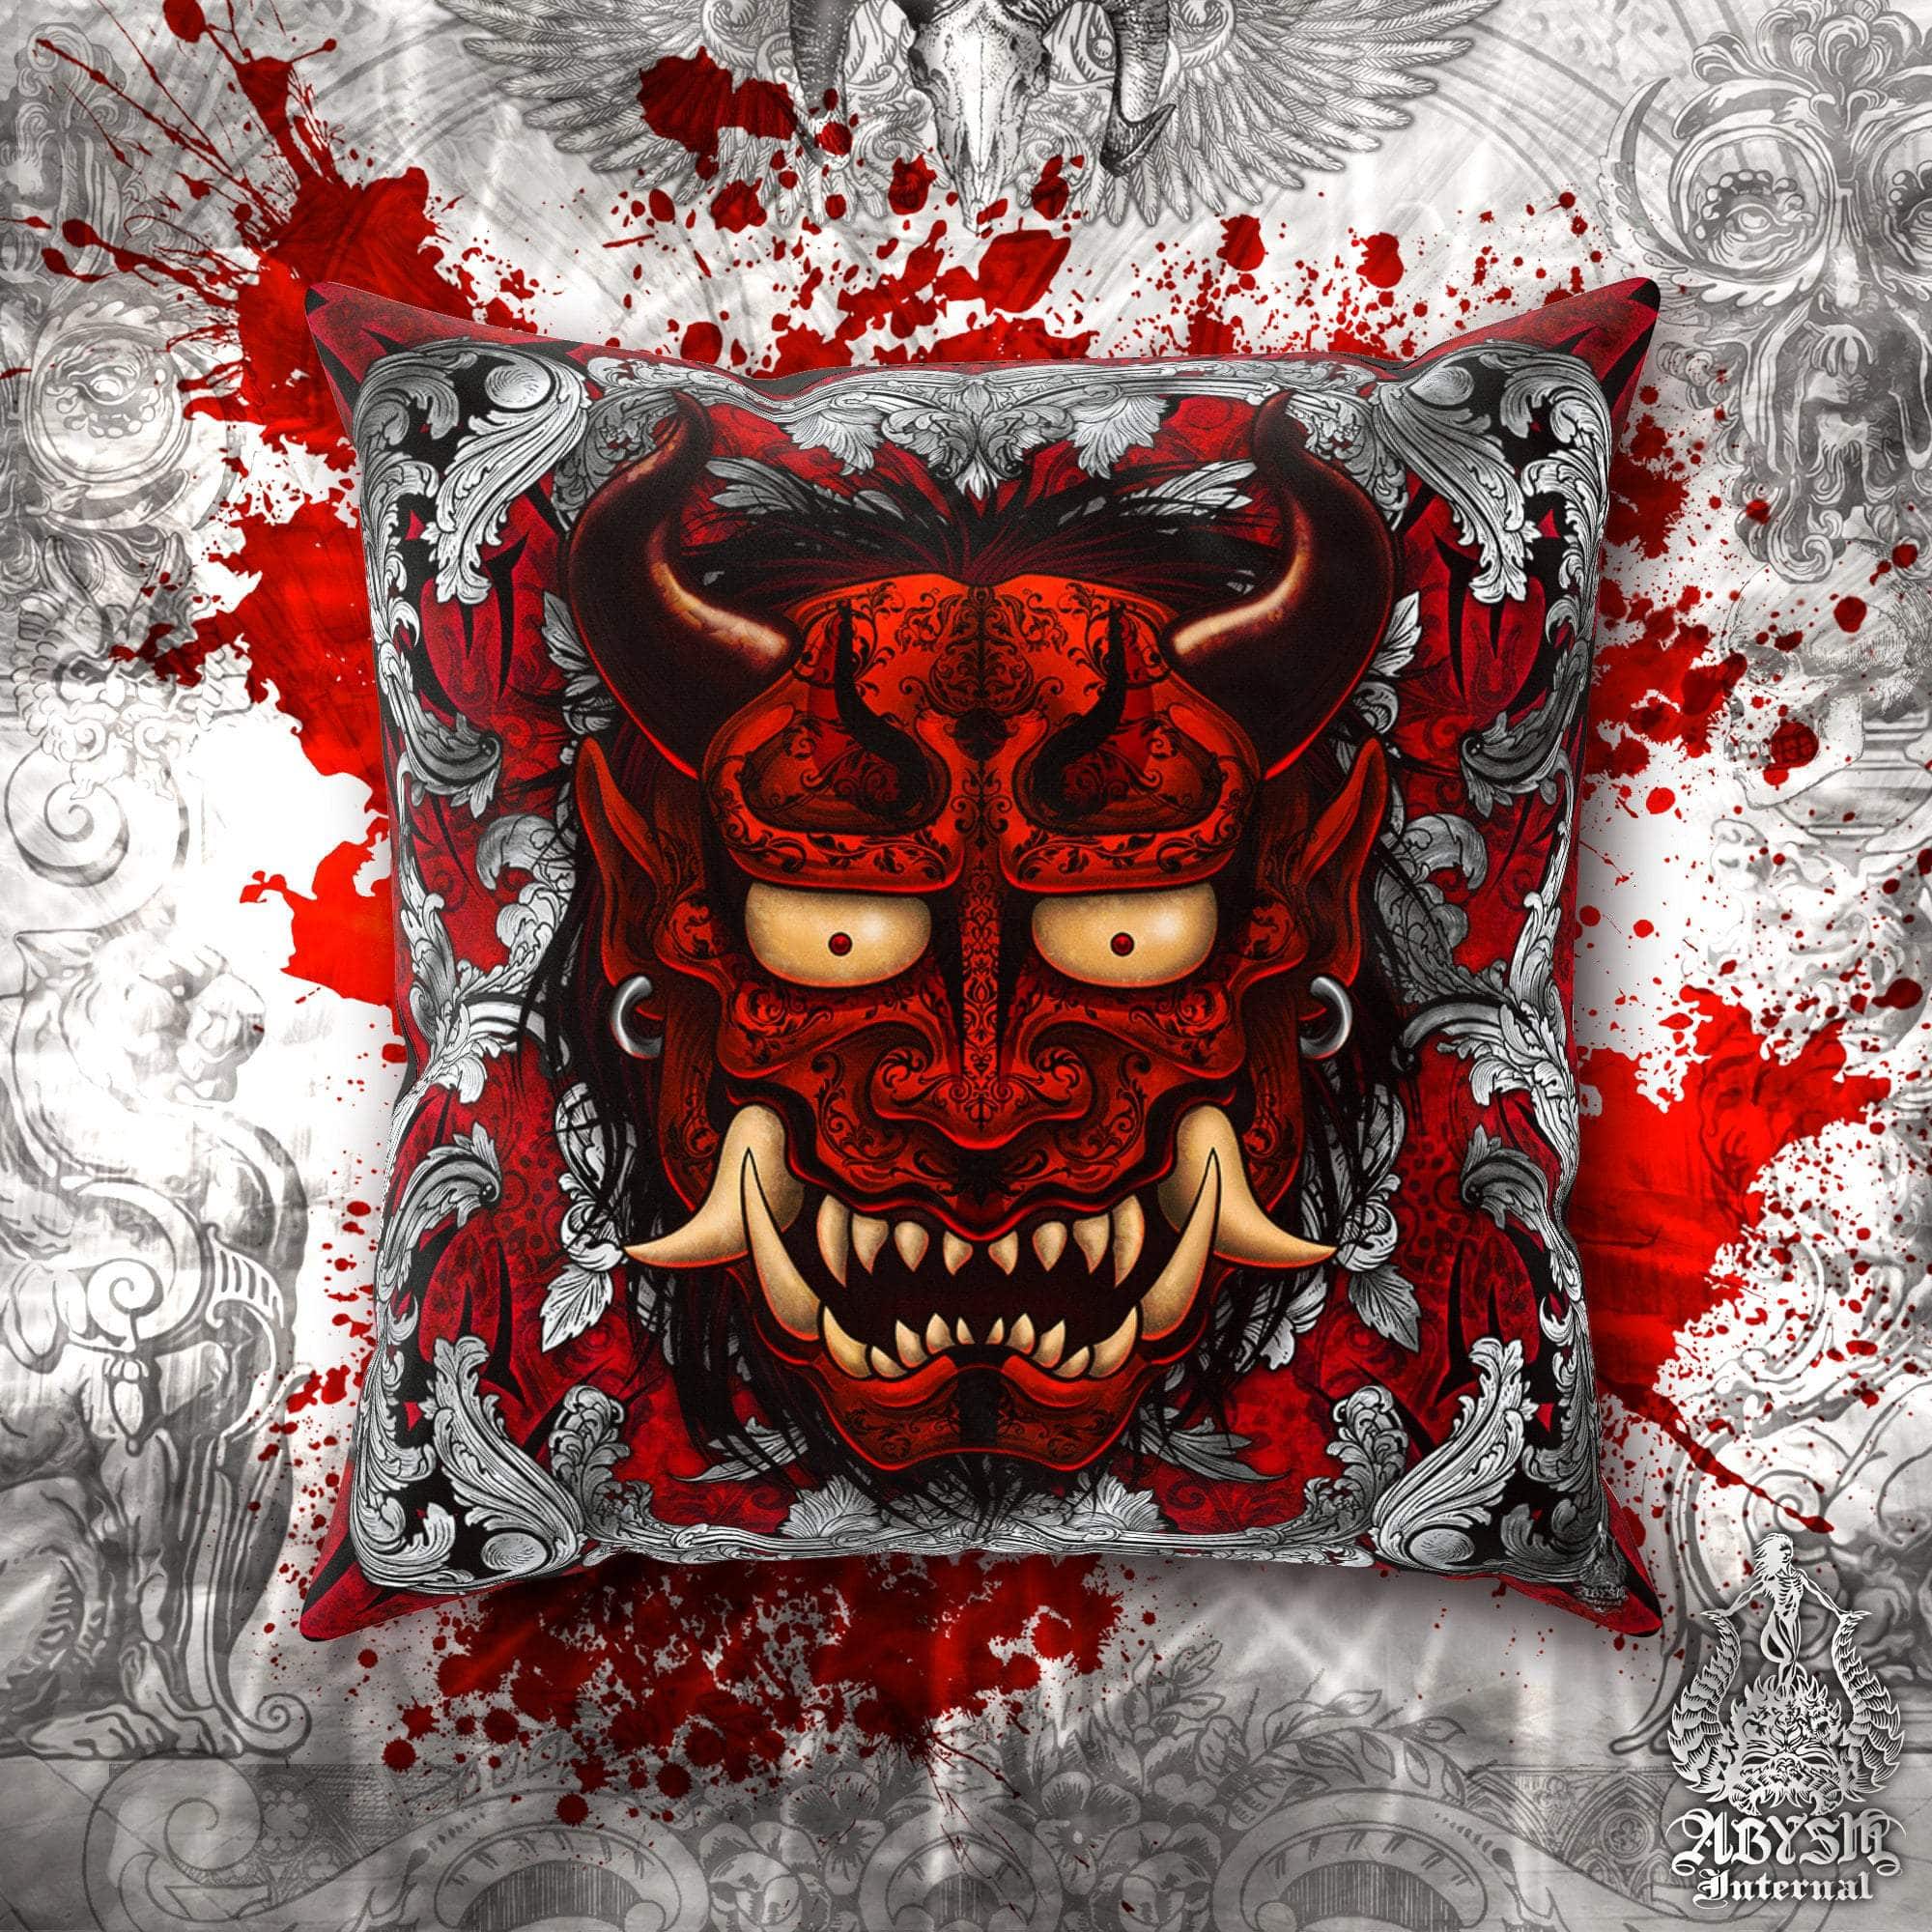 Oni Throw Pillow, Decorative Accent Cushion, Hannya, Demon, Alternative Home - Silver & Red - Abysm Internal